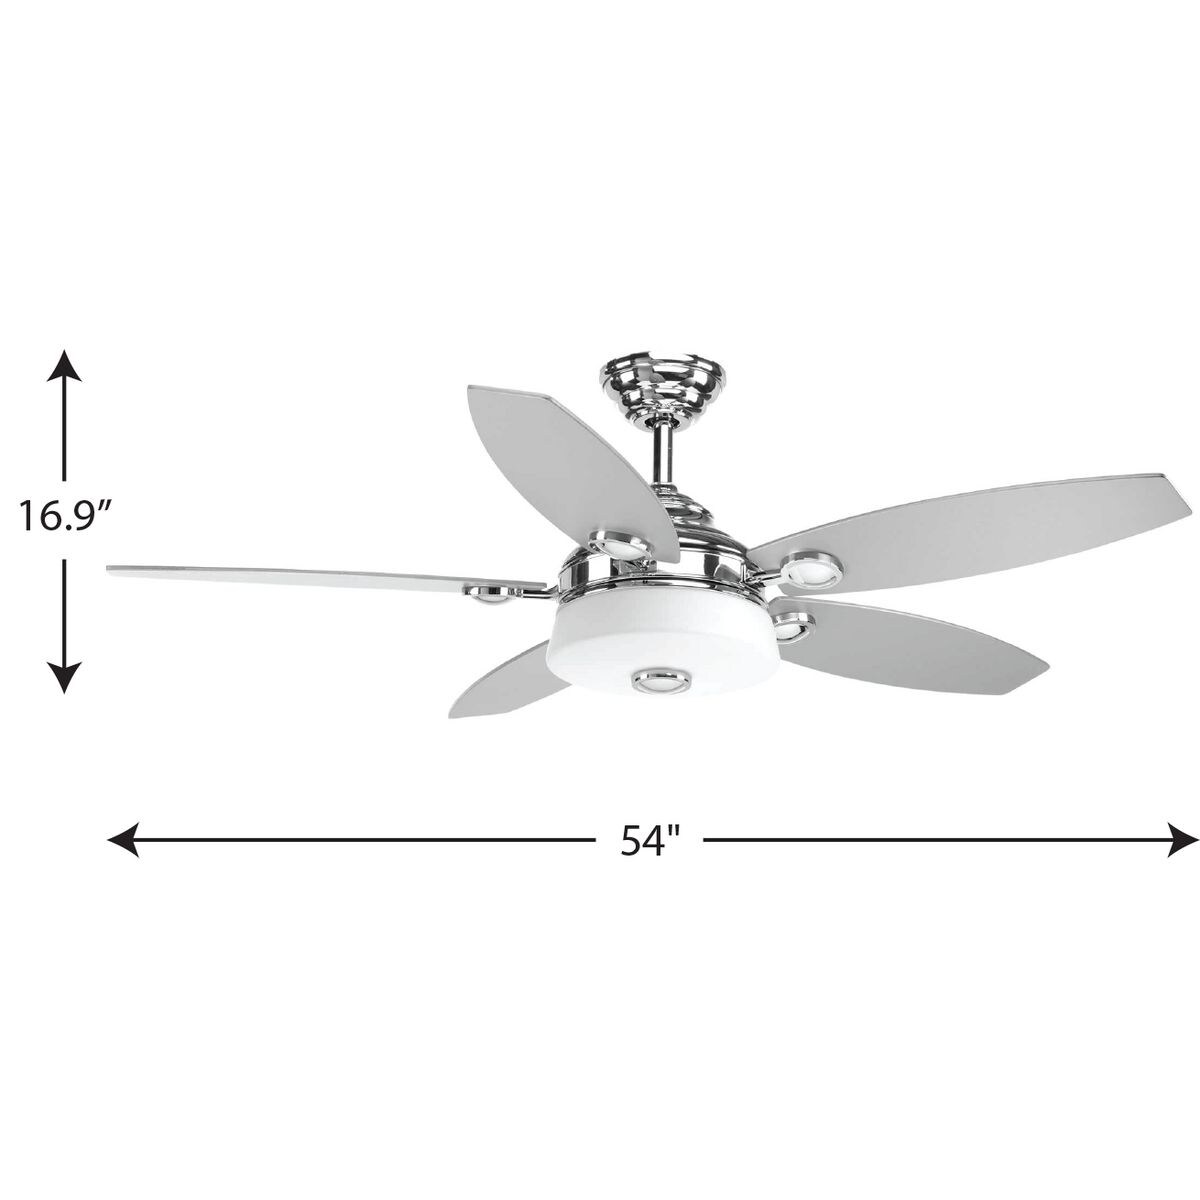 Ceiling Fan With Light Remote